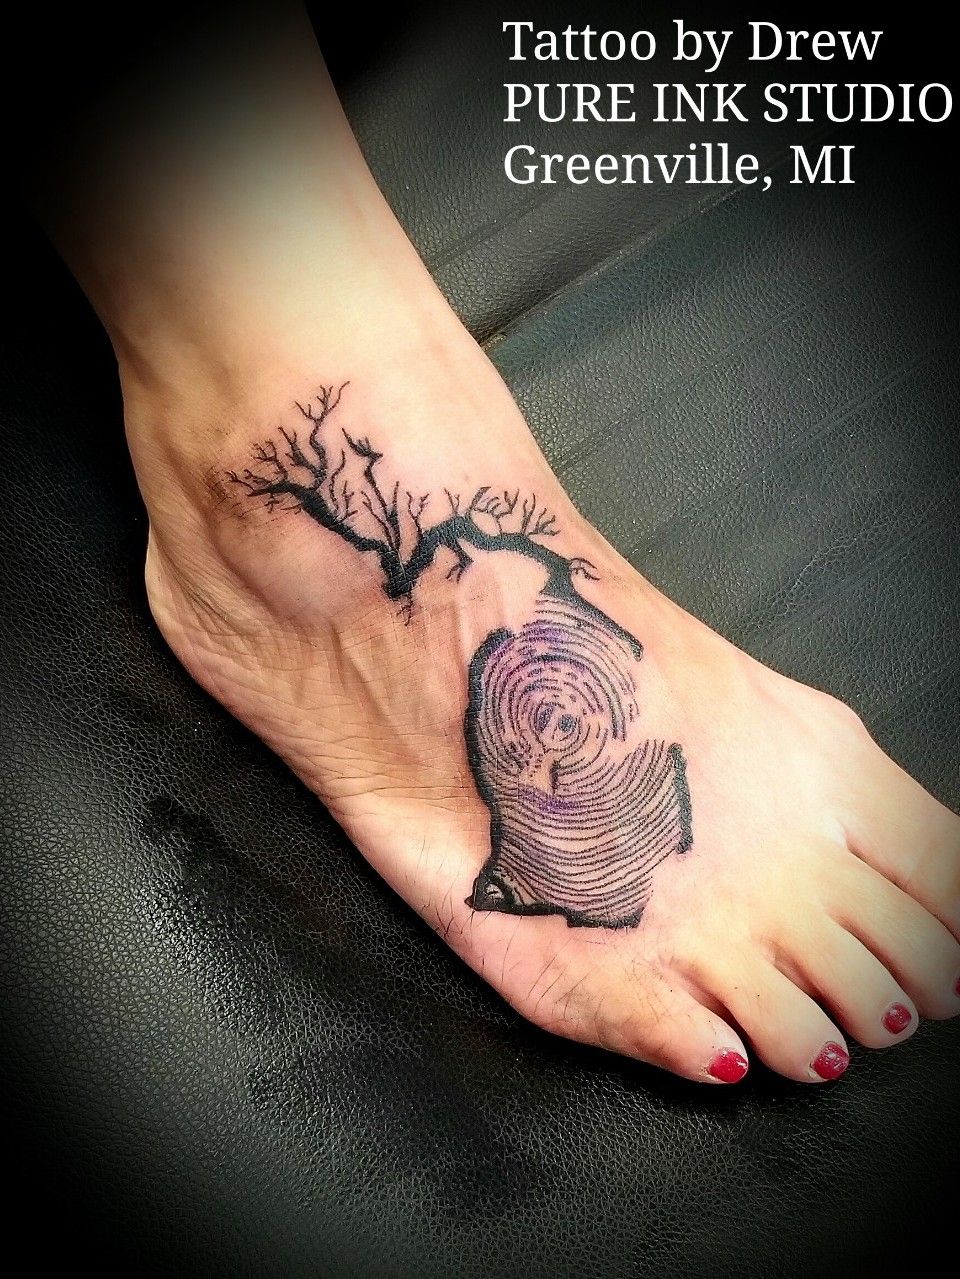 43 Spectacular State of Michigan Tattoos  TattooBlend  Michigan tattoos  M tattoos Tattoos